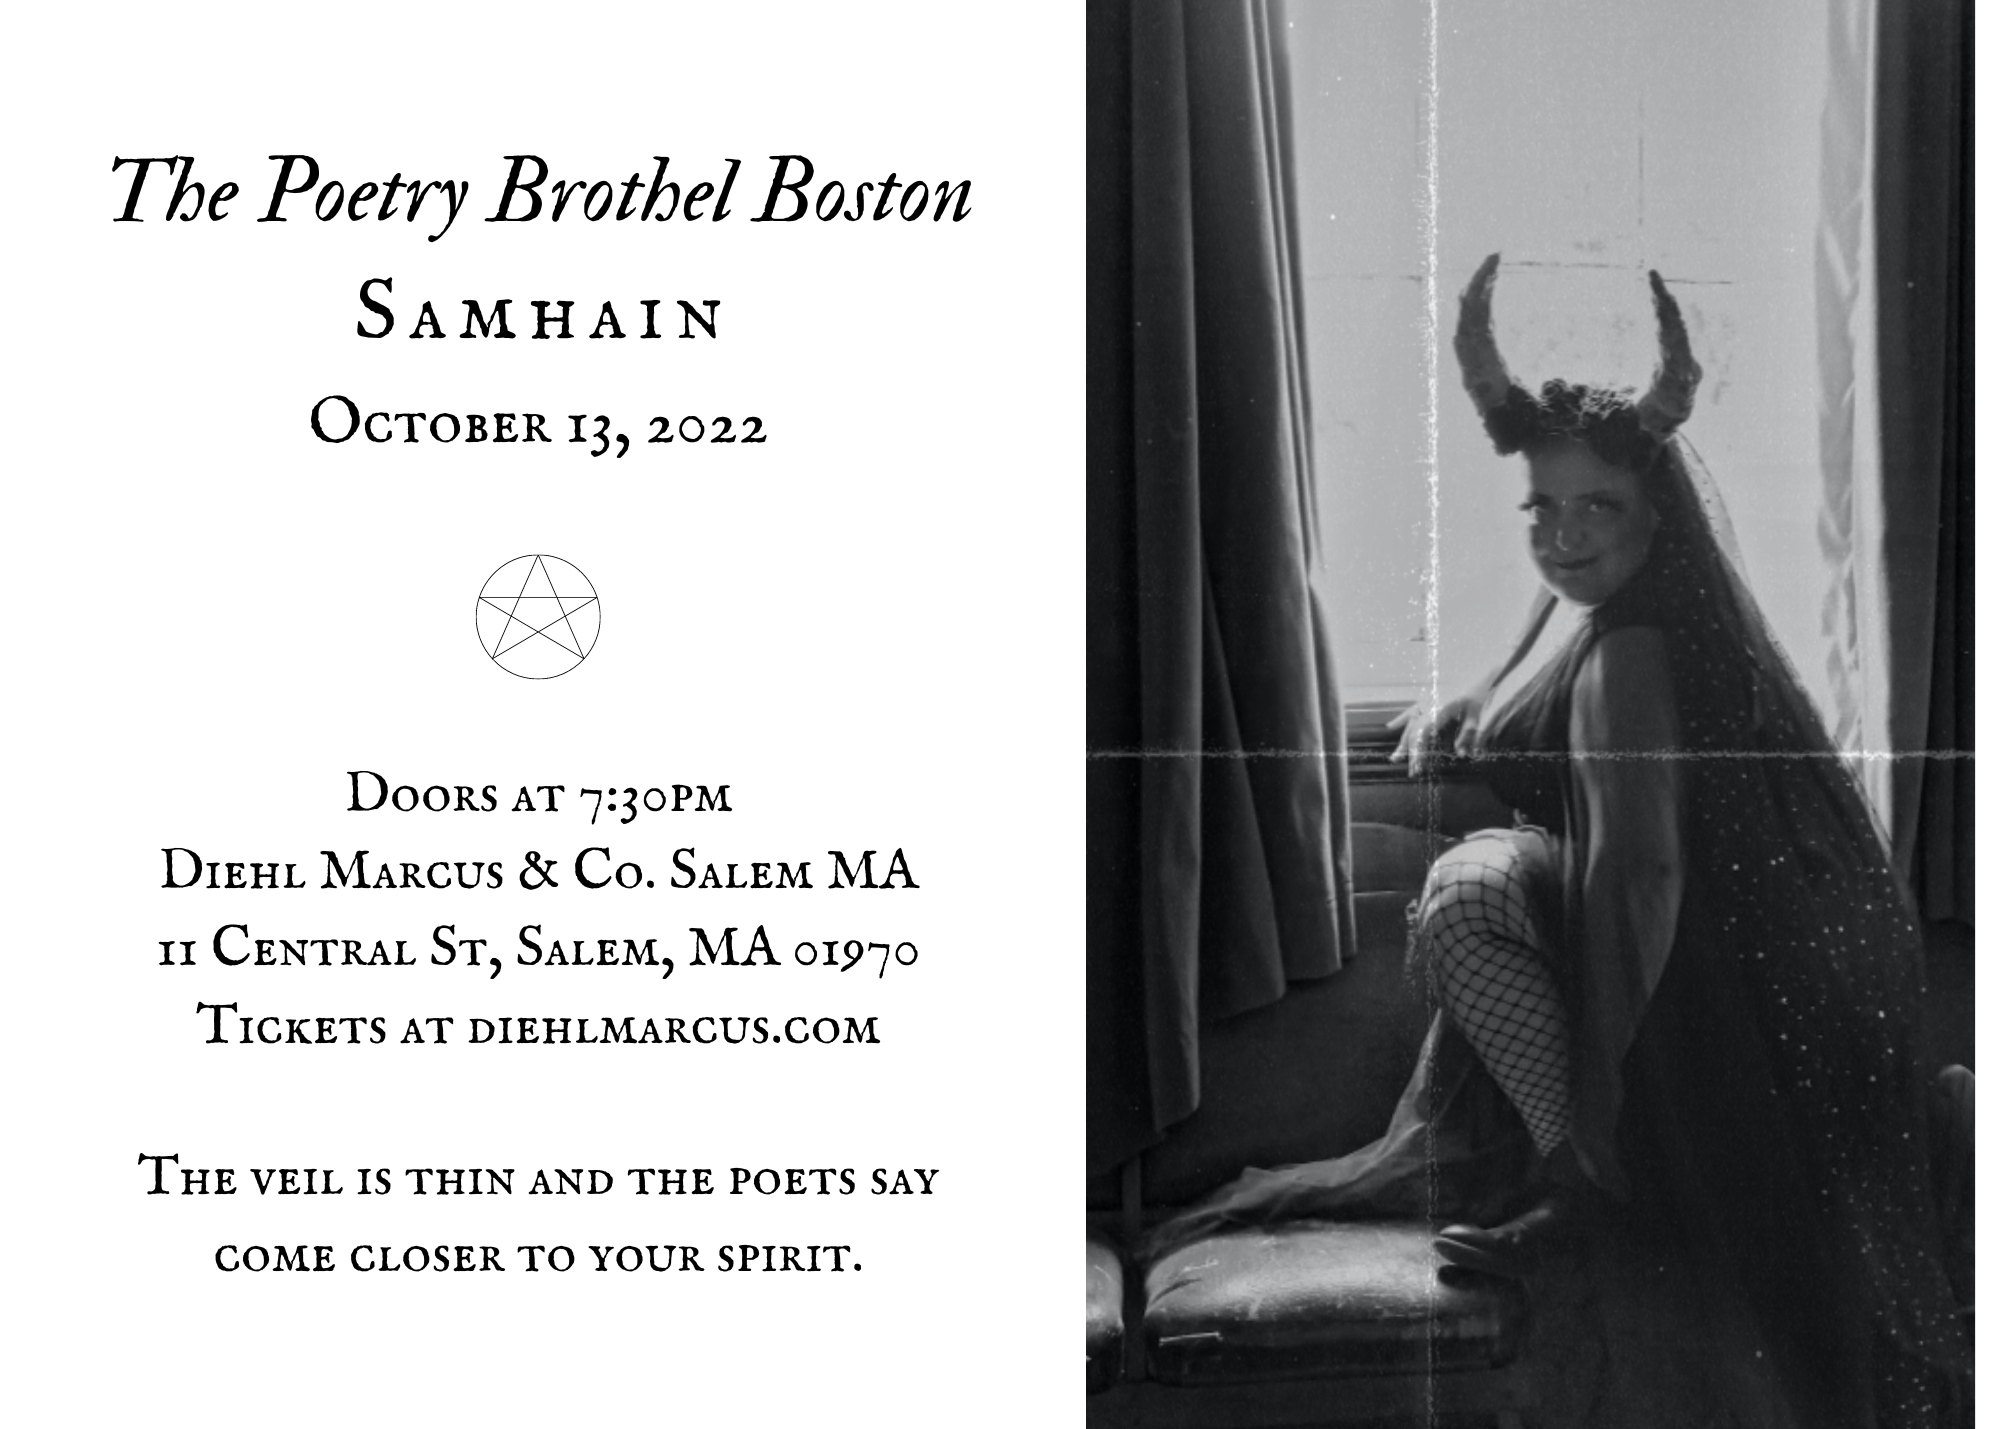 Visual ad for the poetry brothel featuring the event description and the black and white image of a woman wearing a veil and horns